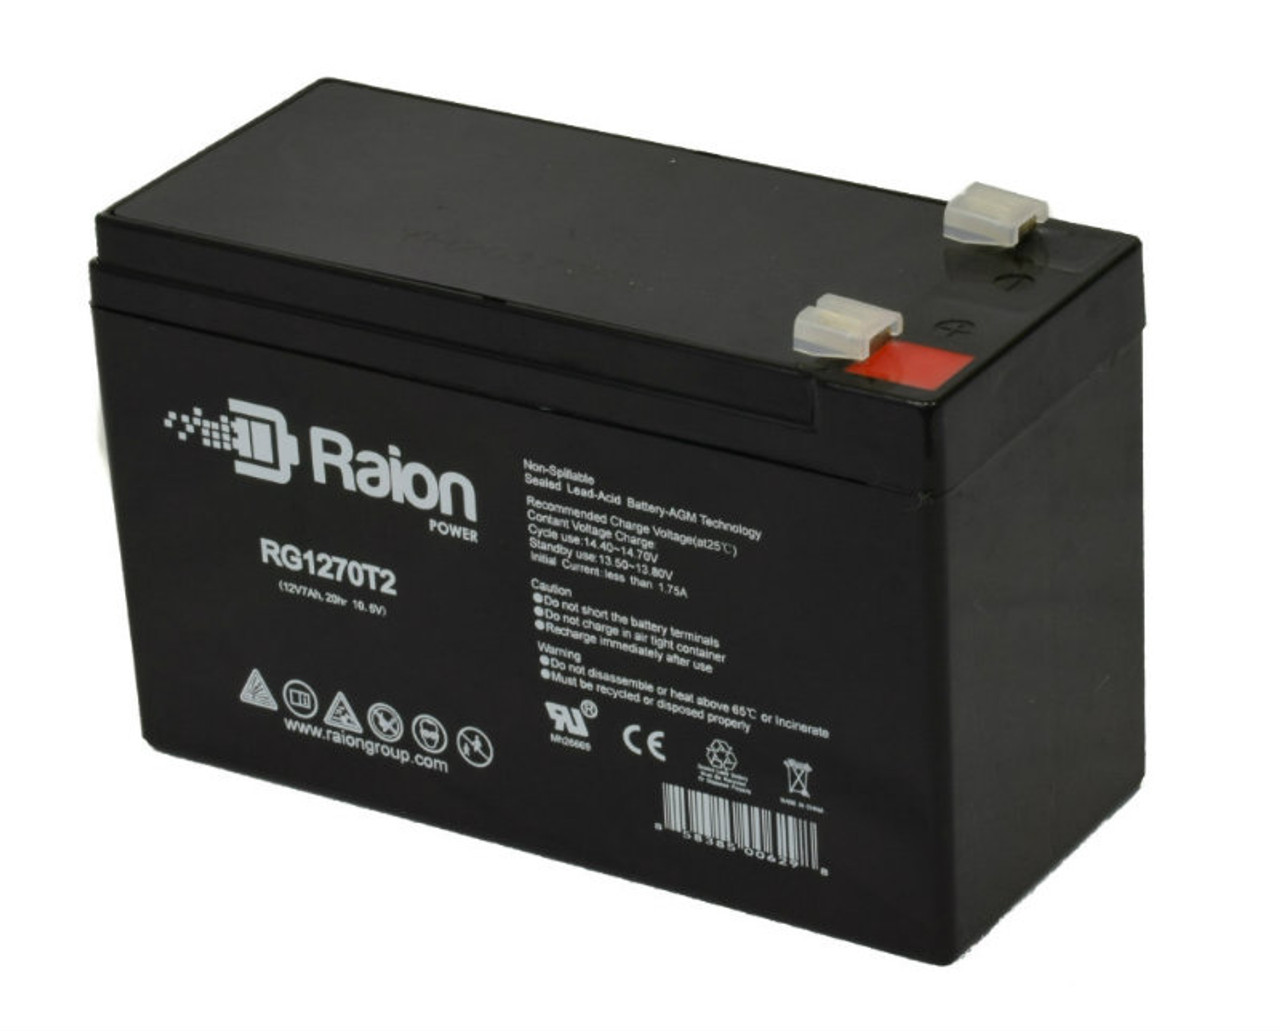 Raion Power RG1270T1 12V 7Ah Non-Spillable Replacement Battery for Burke Big Boy Bed